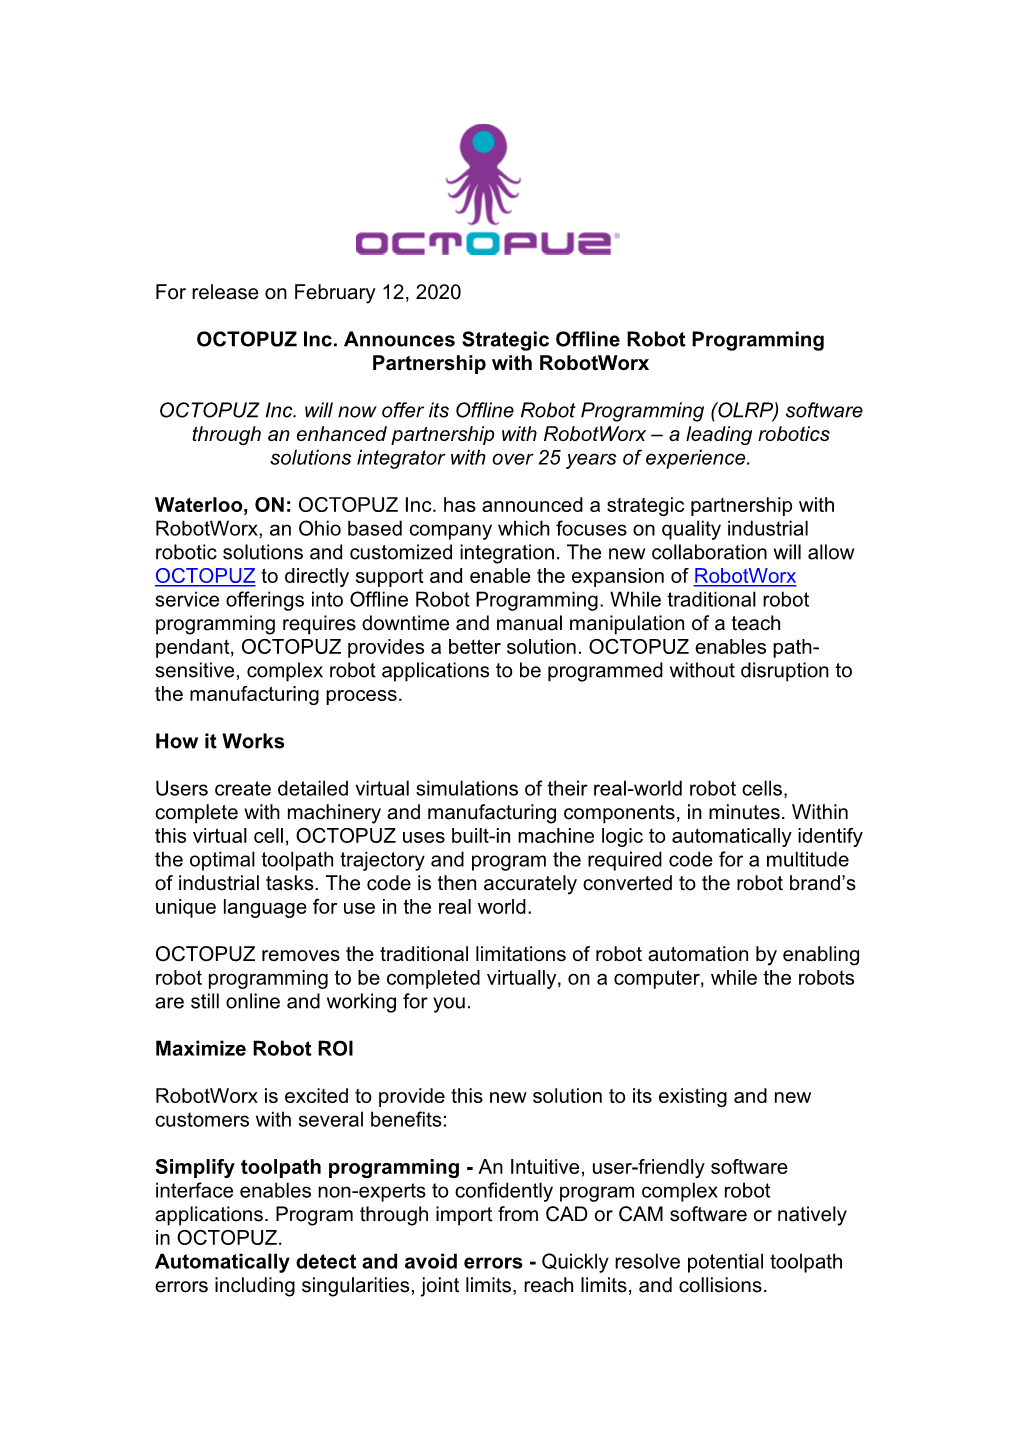 For Release on February 12, 2020 OCTOPUZ Inc. Announces Strategic Offline Robot Programming Partnership with Robotworx OCTOPUZ I